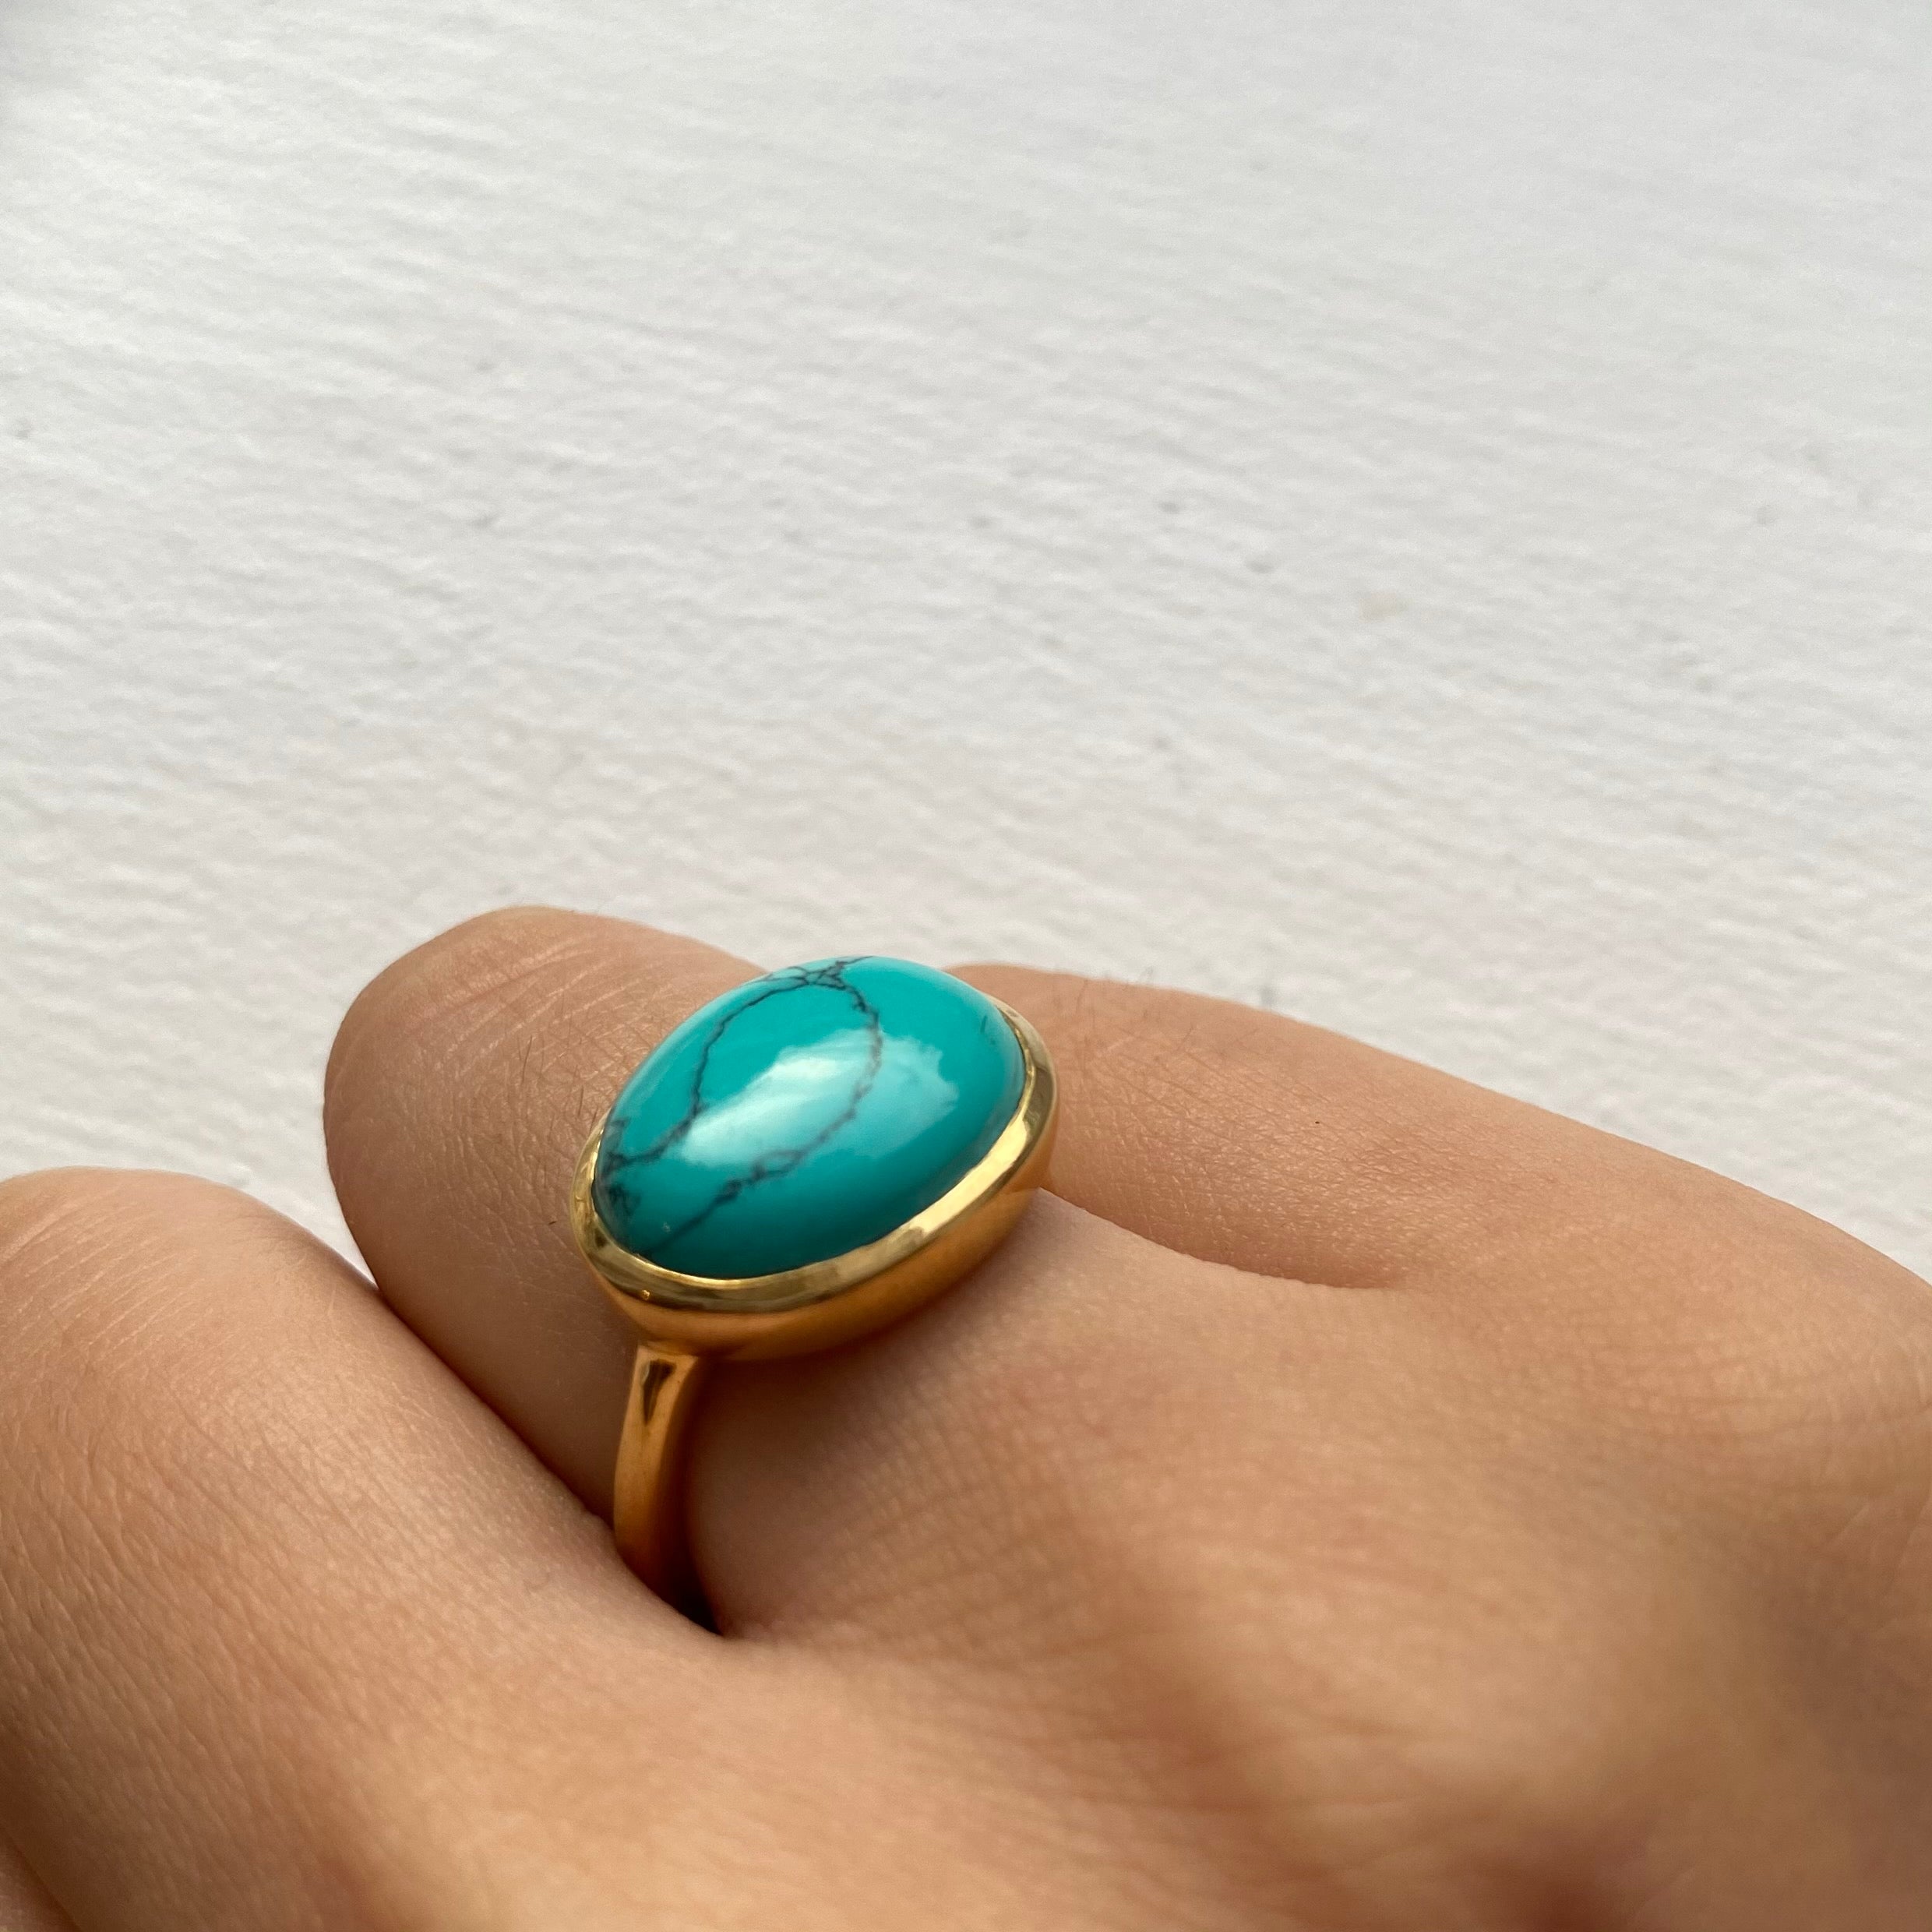 Cabochon Oval Cut Natural Gemstone Gold Plated Sterling Silver Ring - Turquoise